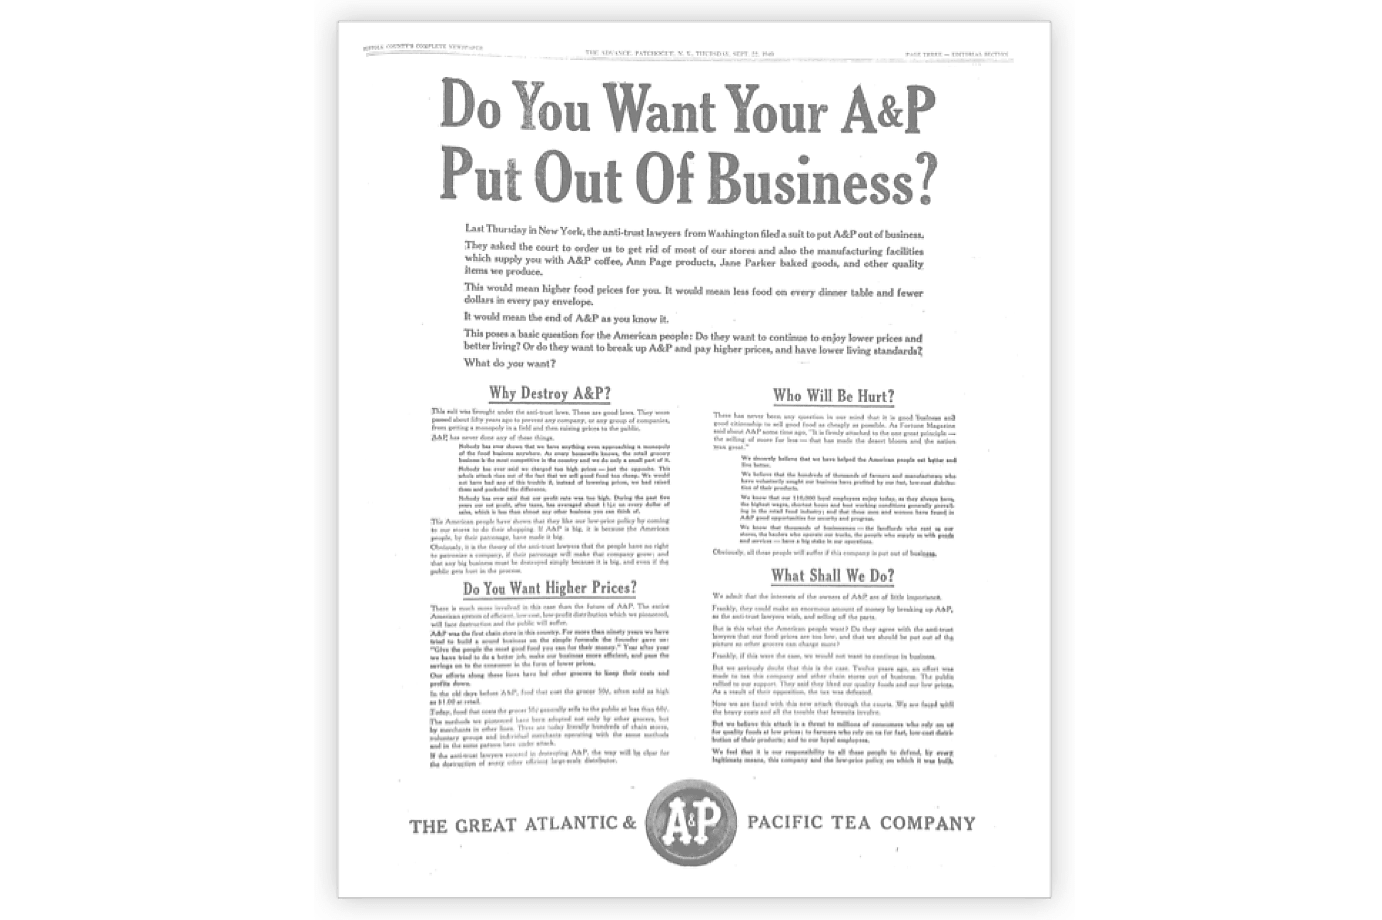 "Do You Want Your A&P Put Out of Business?" Newspaper Advertisement